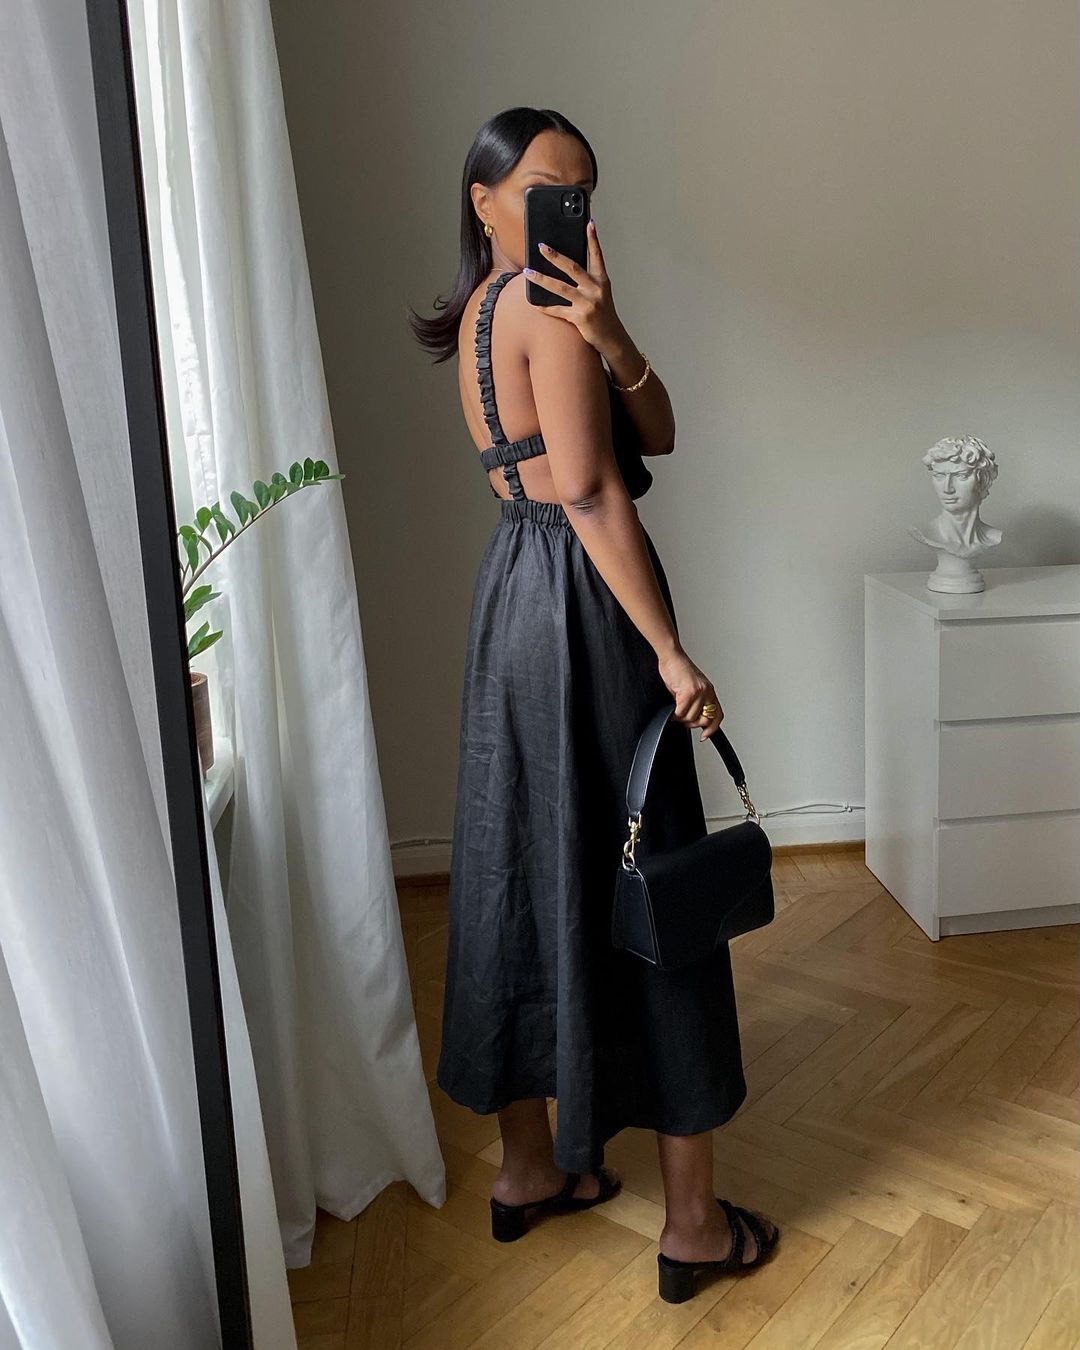 Best stick-on bras and adhesive cup bras: @femmeblk wears a black backless dress